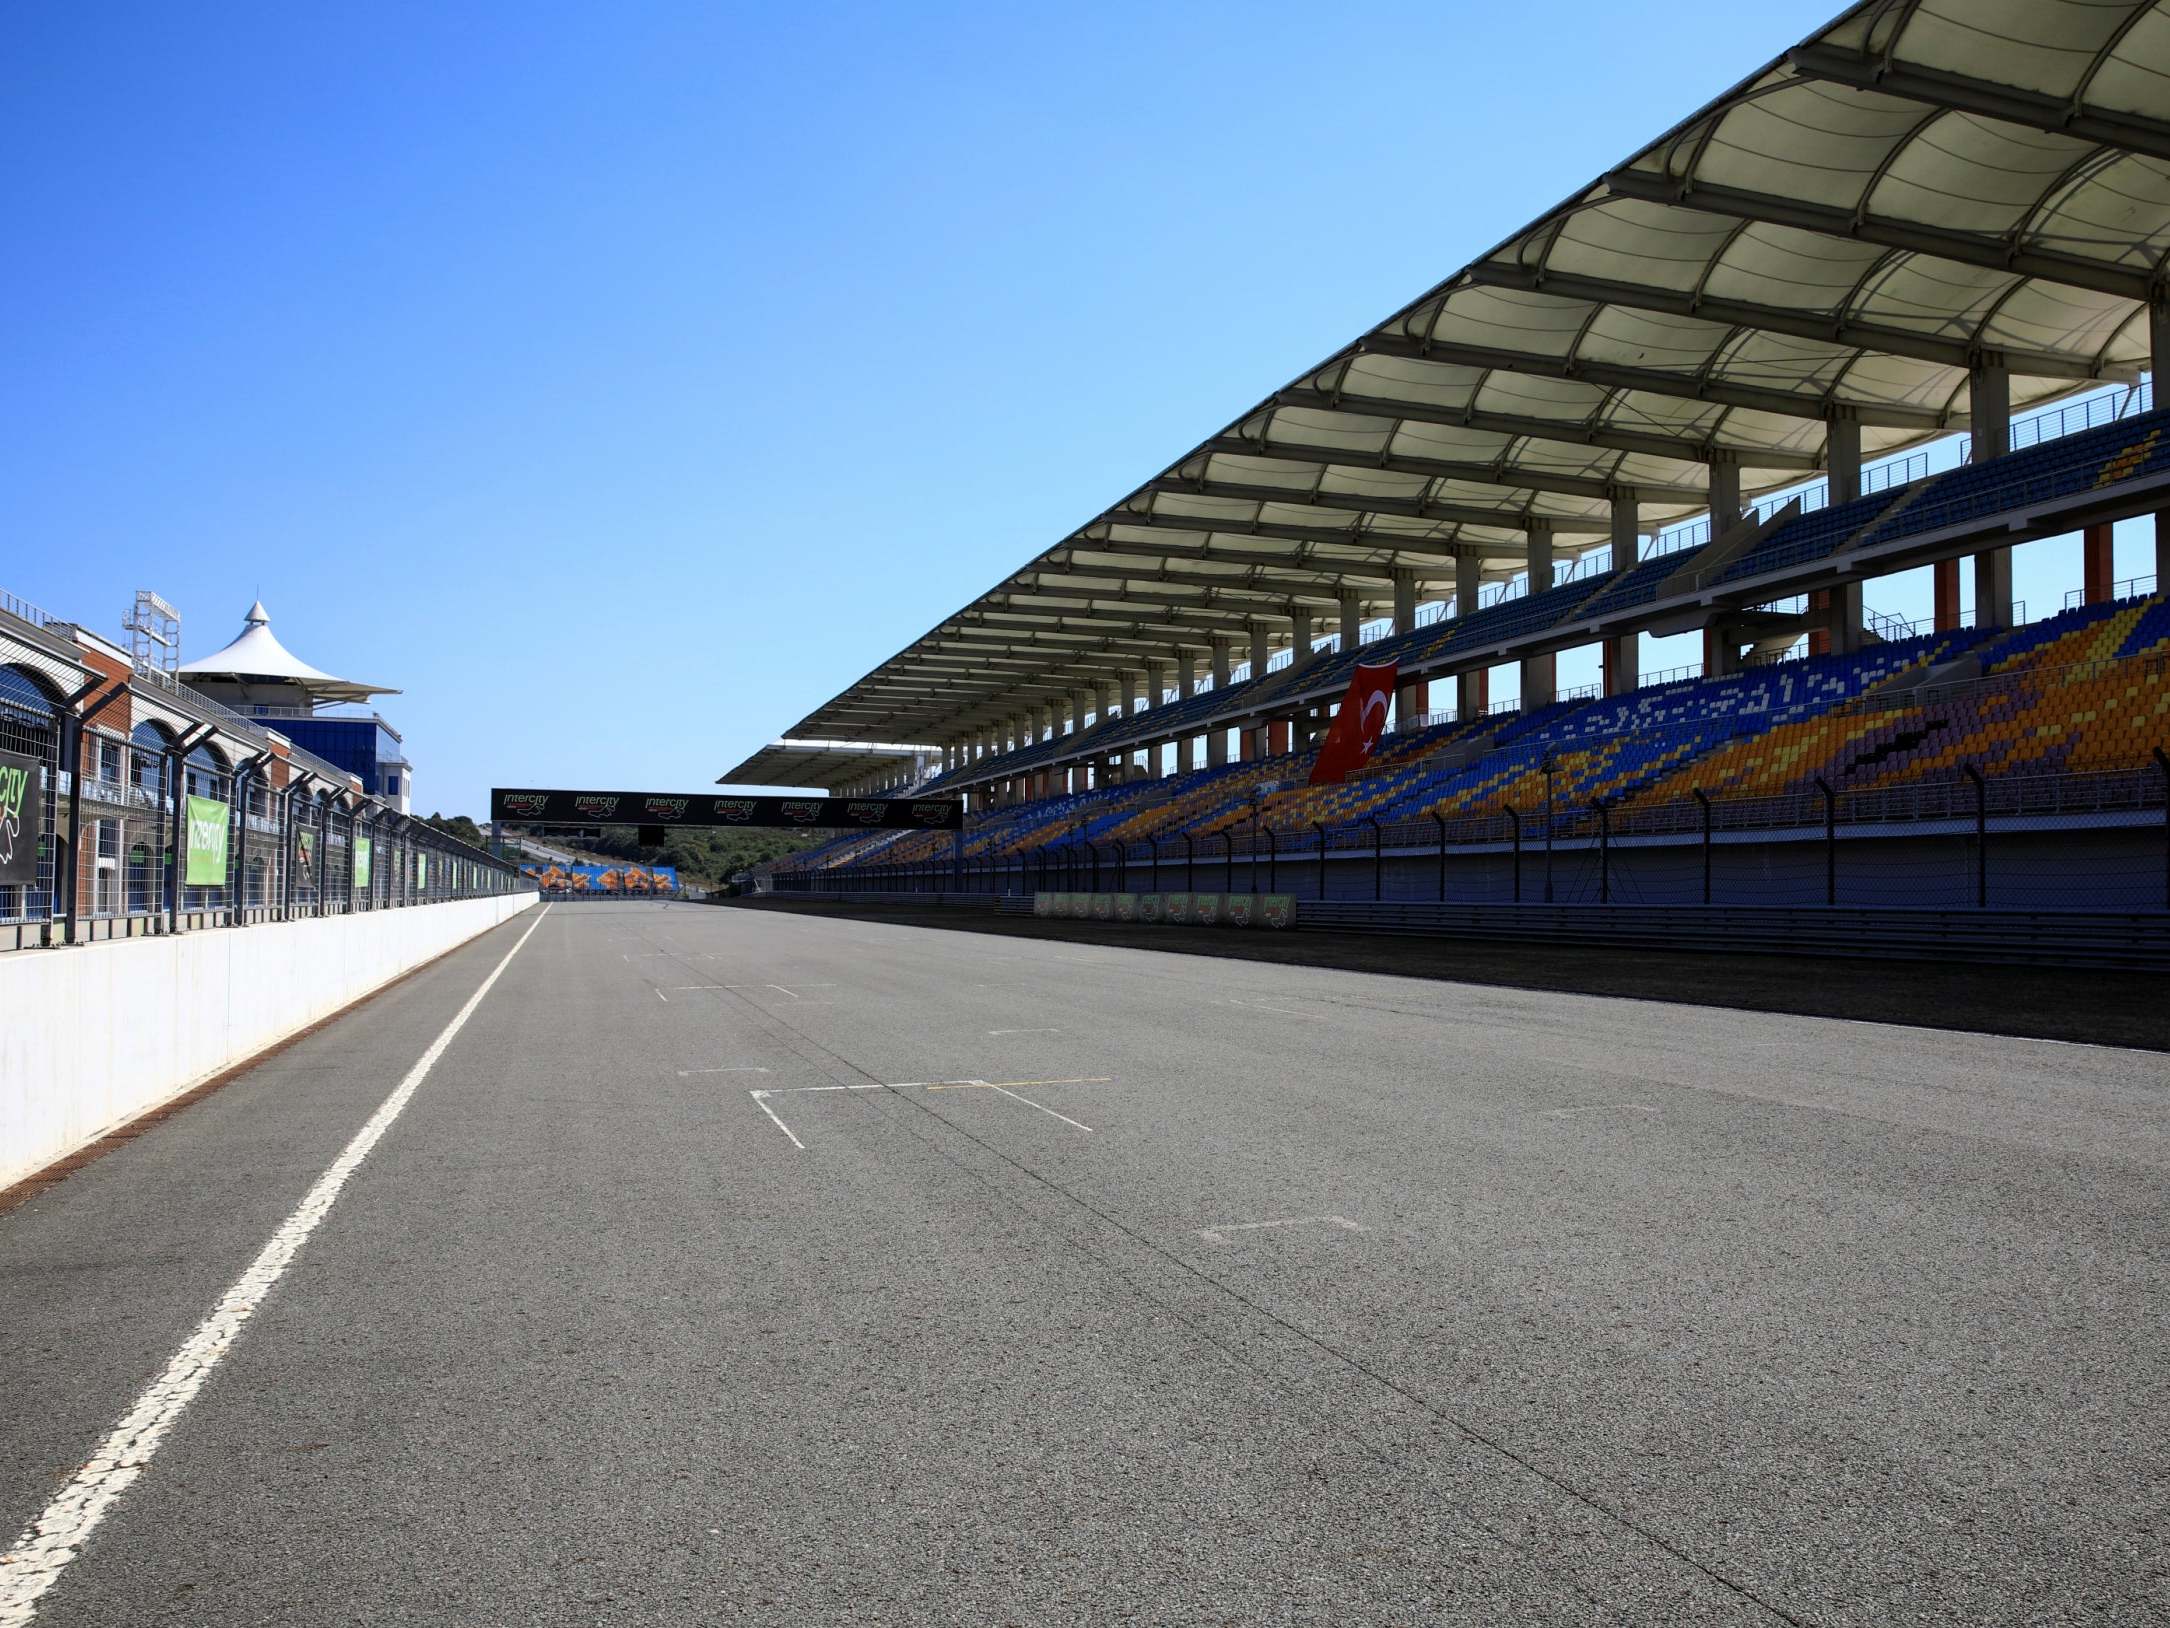 Istanbul Park will return to the Formula One calendar in November with plans for tens of thousands of fans in attendance